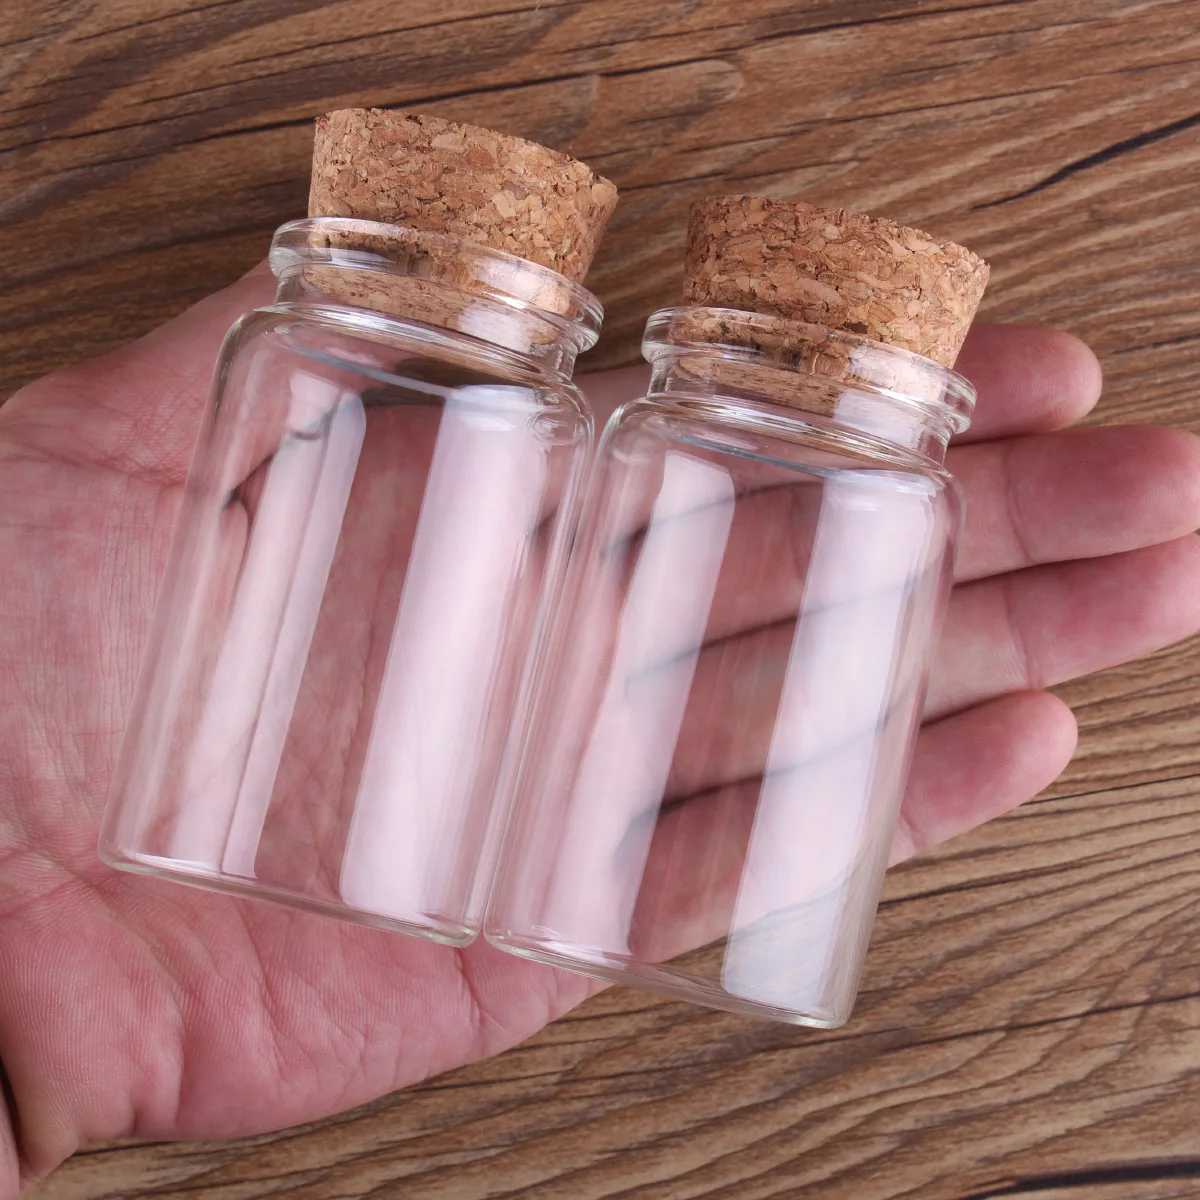 

24 Pieces 100ml Glass Bottles with Cork Stopper Spice Bottles Pill Container Candy Jars Vials DIY Craft for Wedding Gift